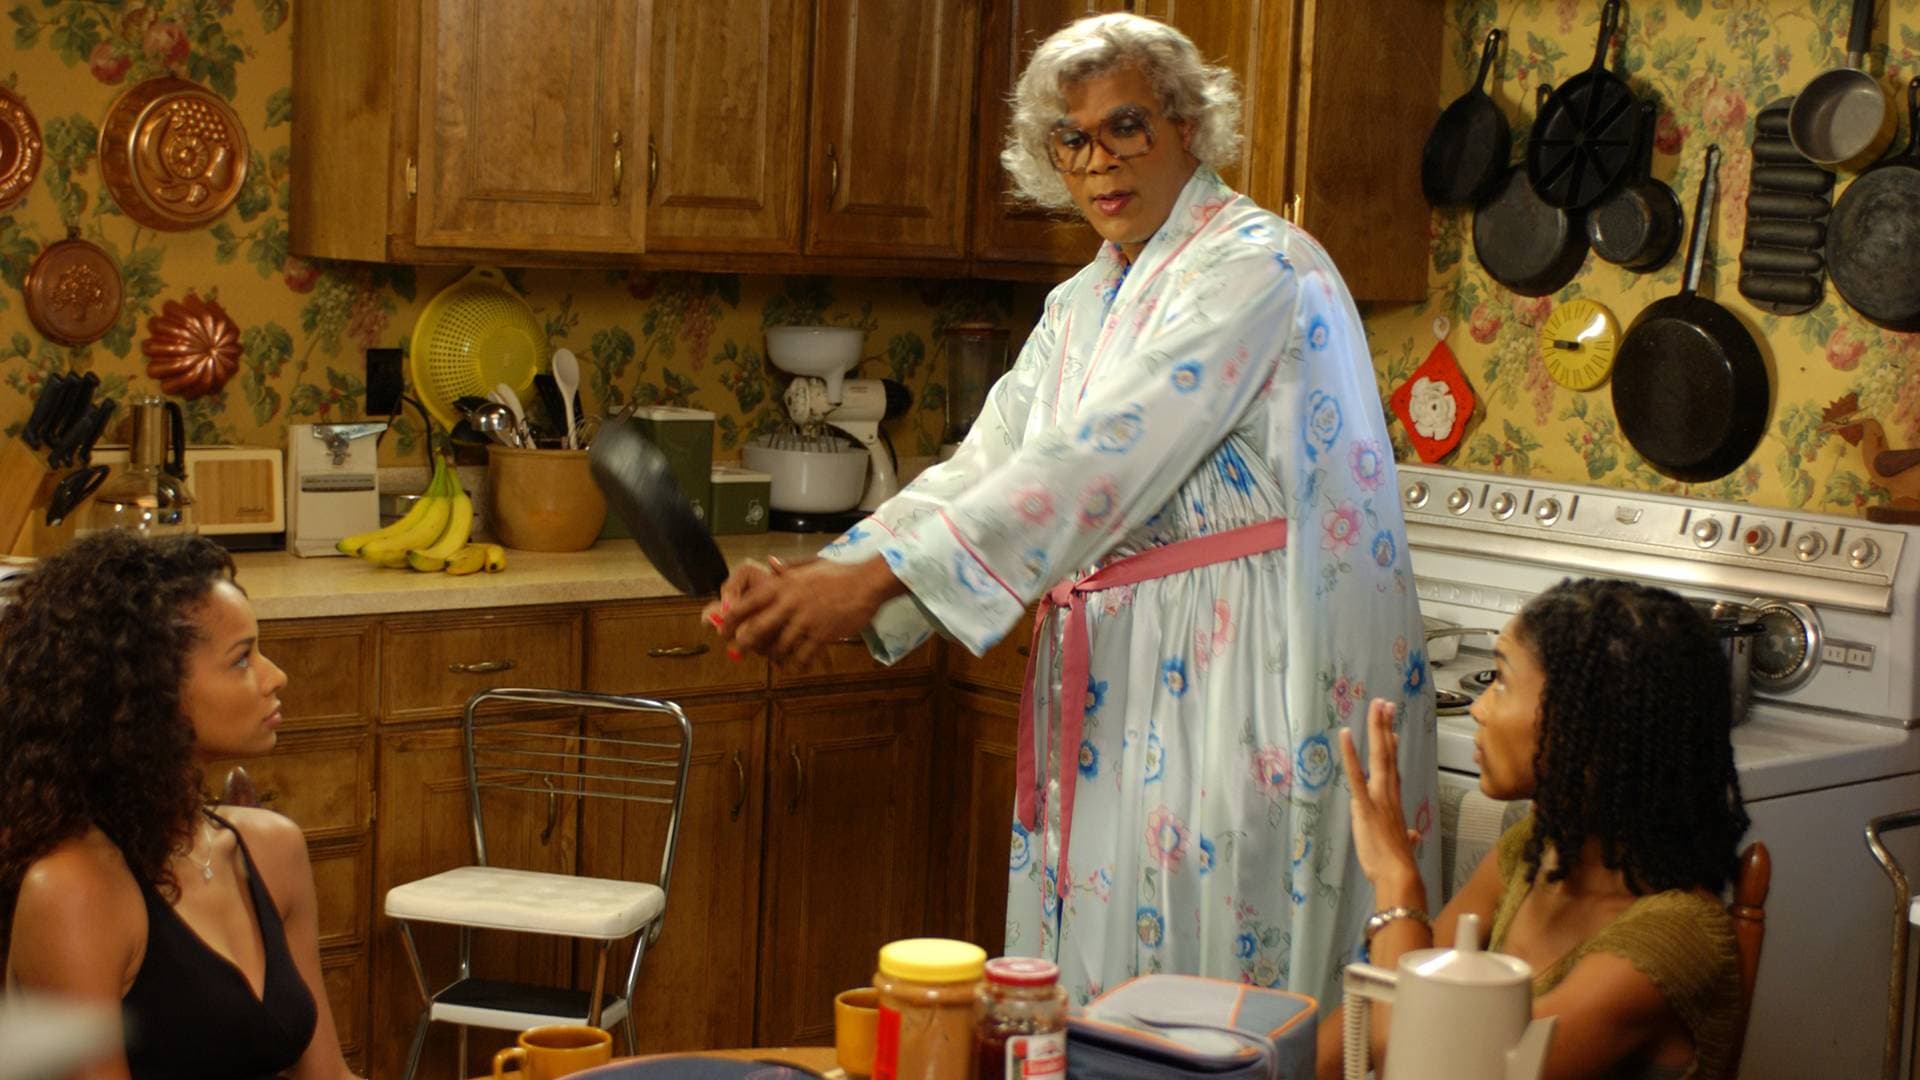 debbie more recommends madea reunion full movie pic